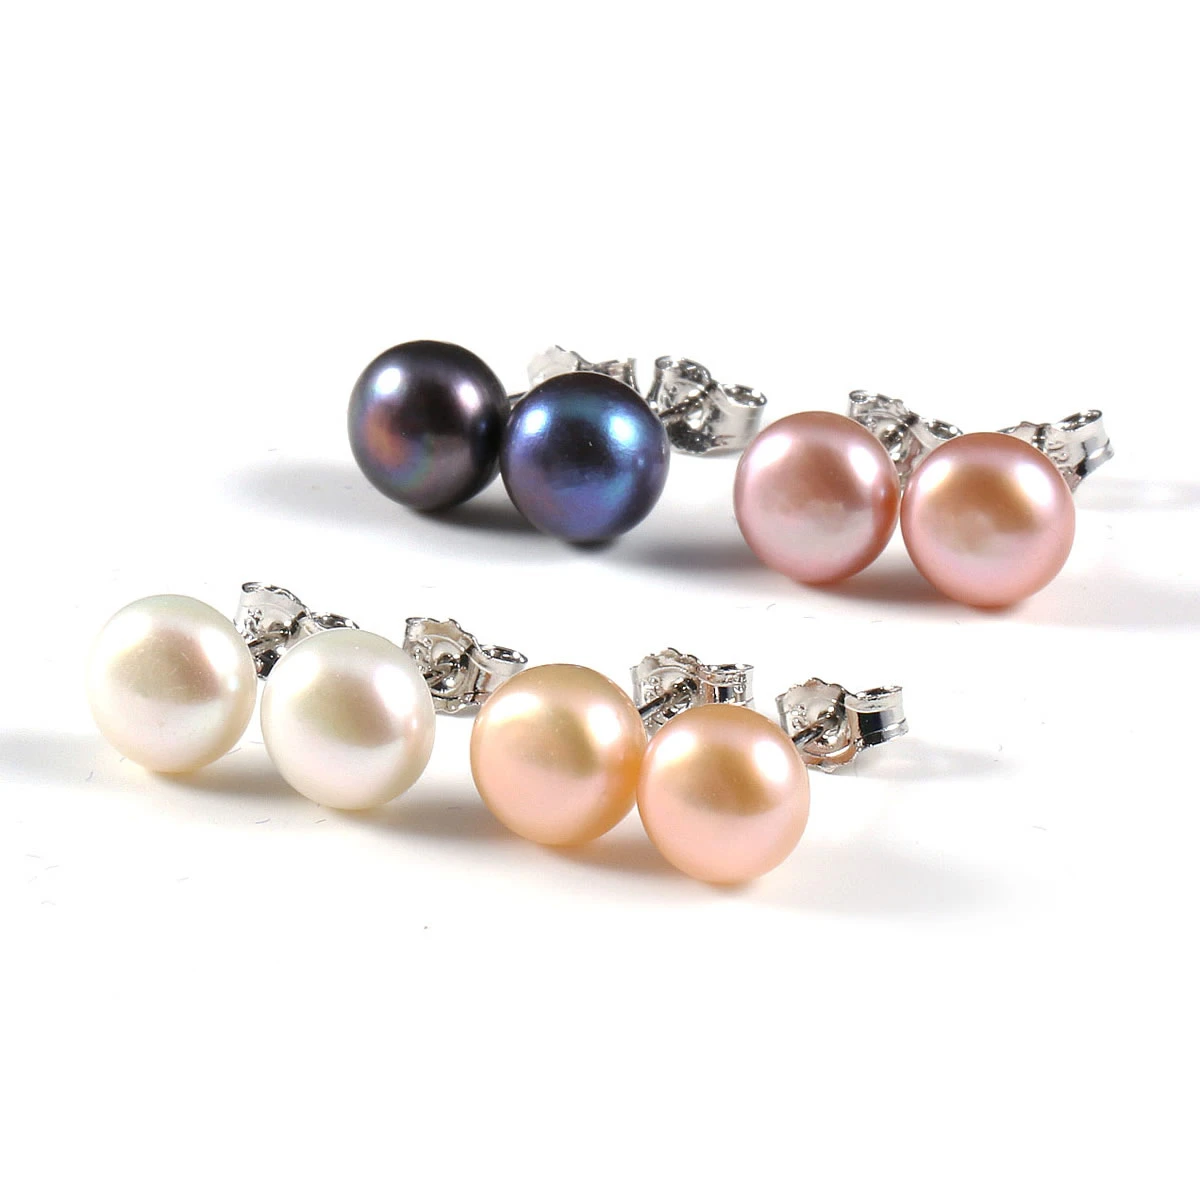 100% Natural Pearl Stud Earrings Genuine Natural Freshwater Pearls Earring Exquisite Jewelry Gifts for Women 4 Colors Wholesale